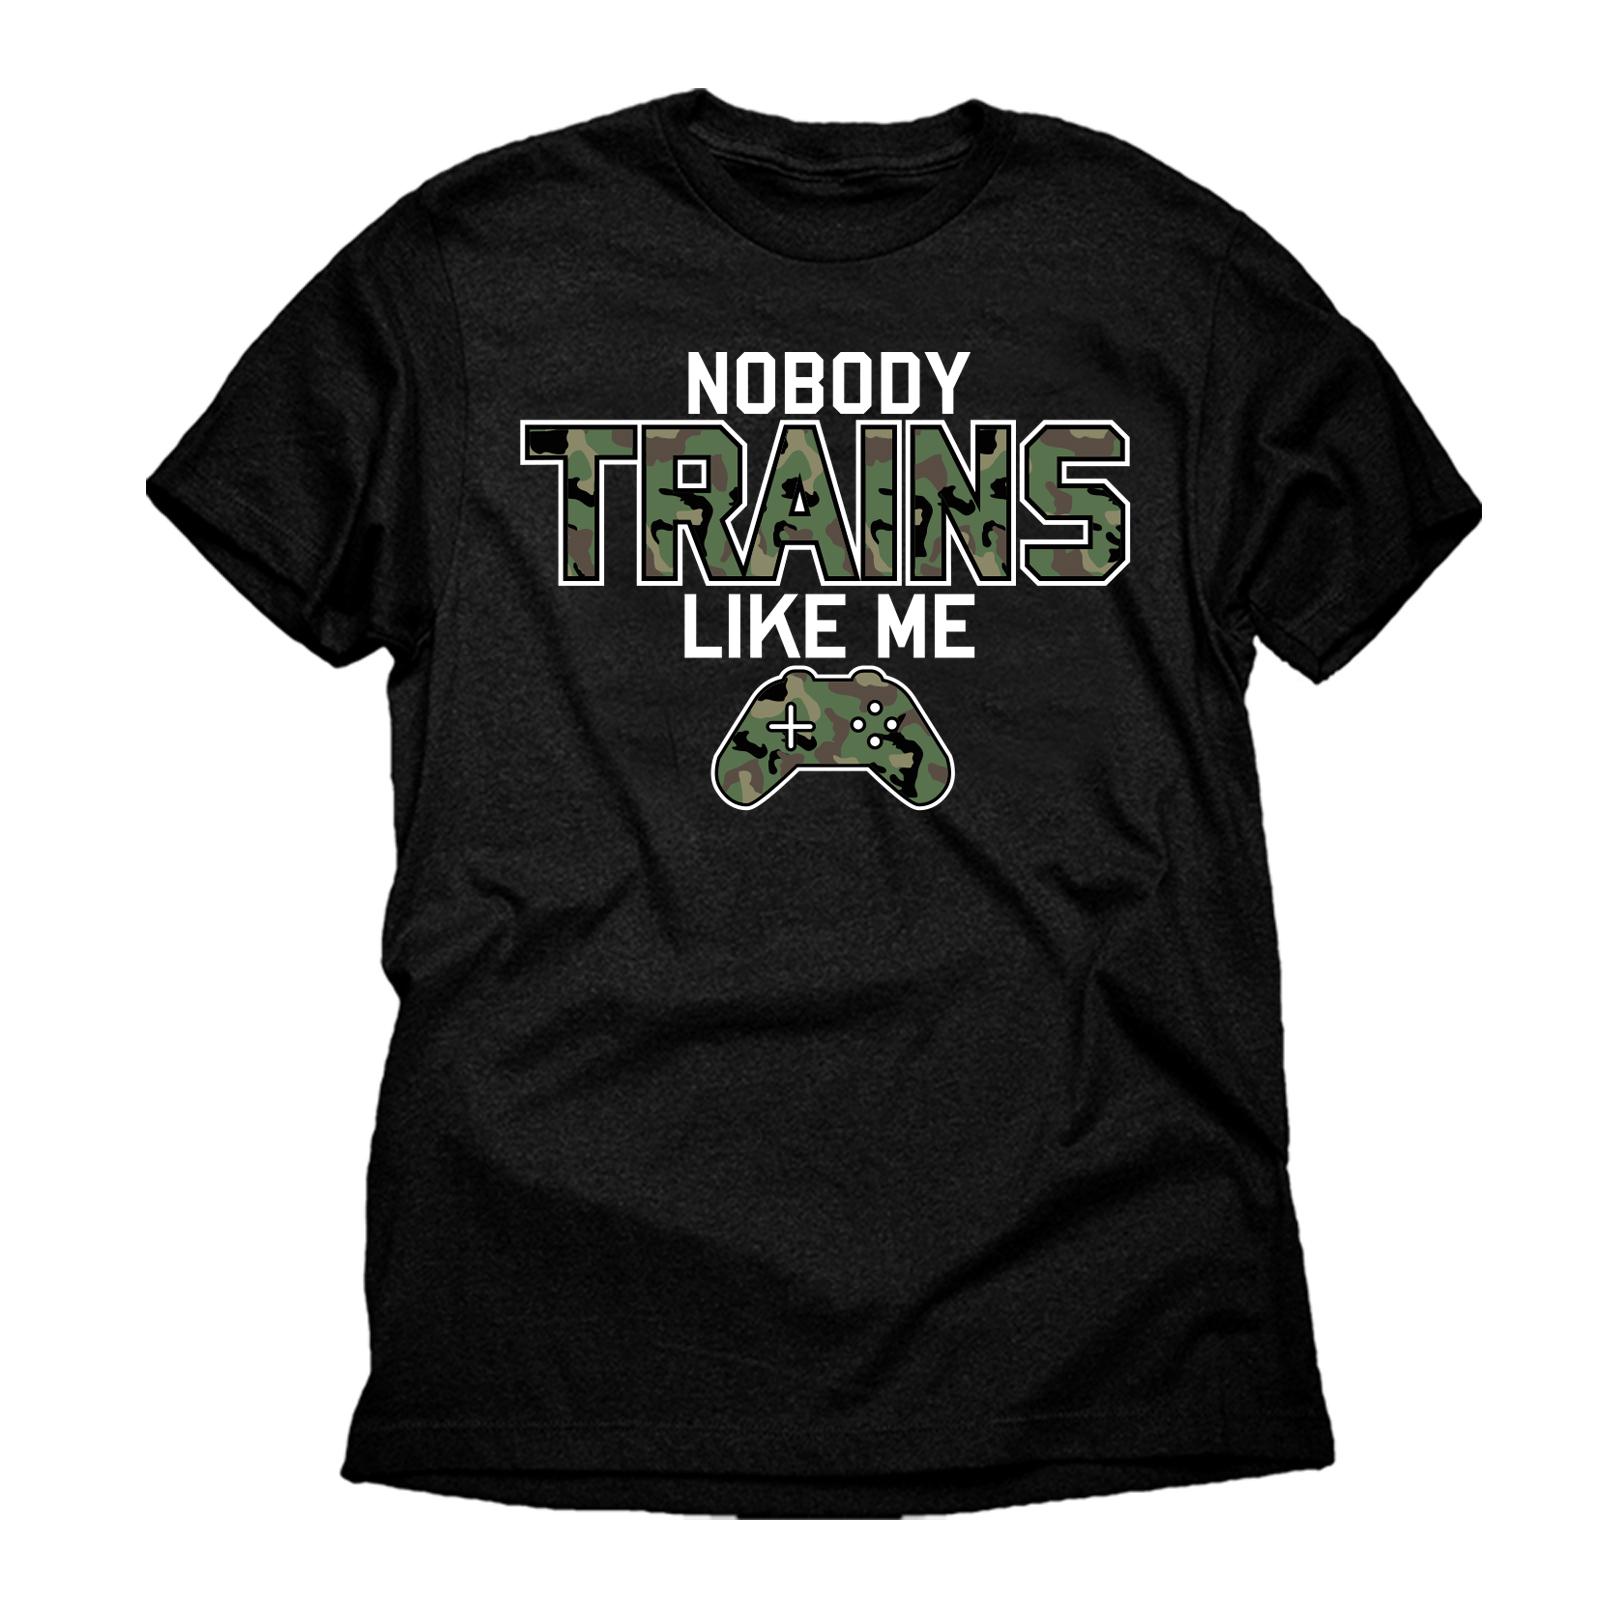 Route 66 Boy's Graphic T-Shirt - Nobody Trains Like Me